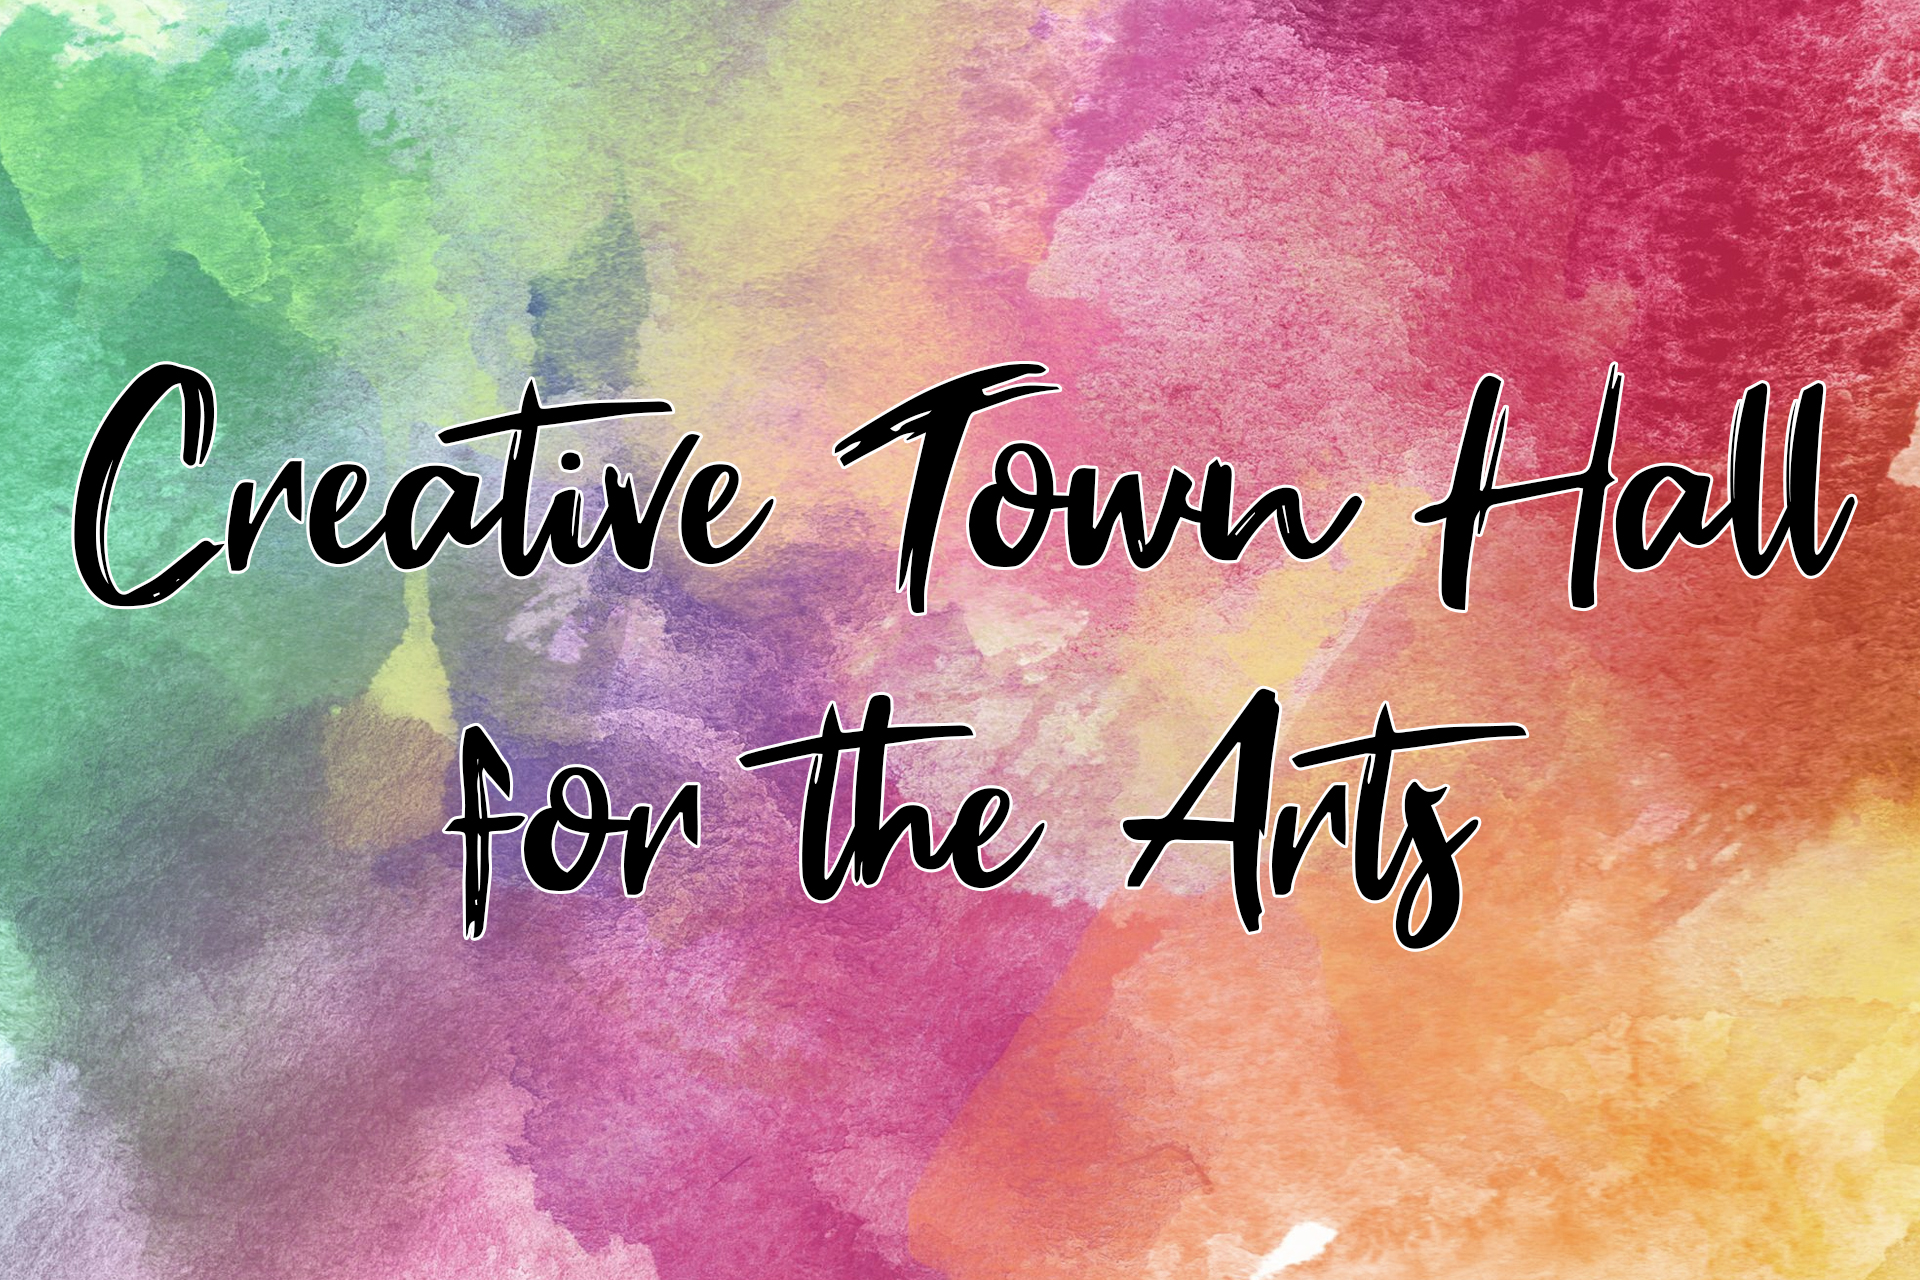 Creative Town Hall for the Arts_2019 website